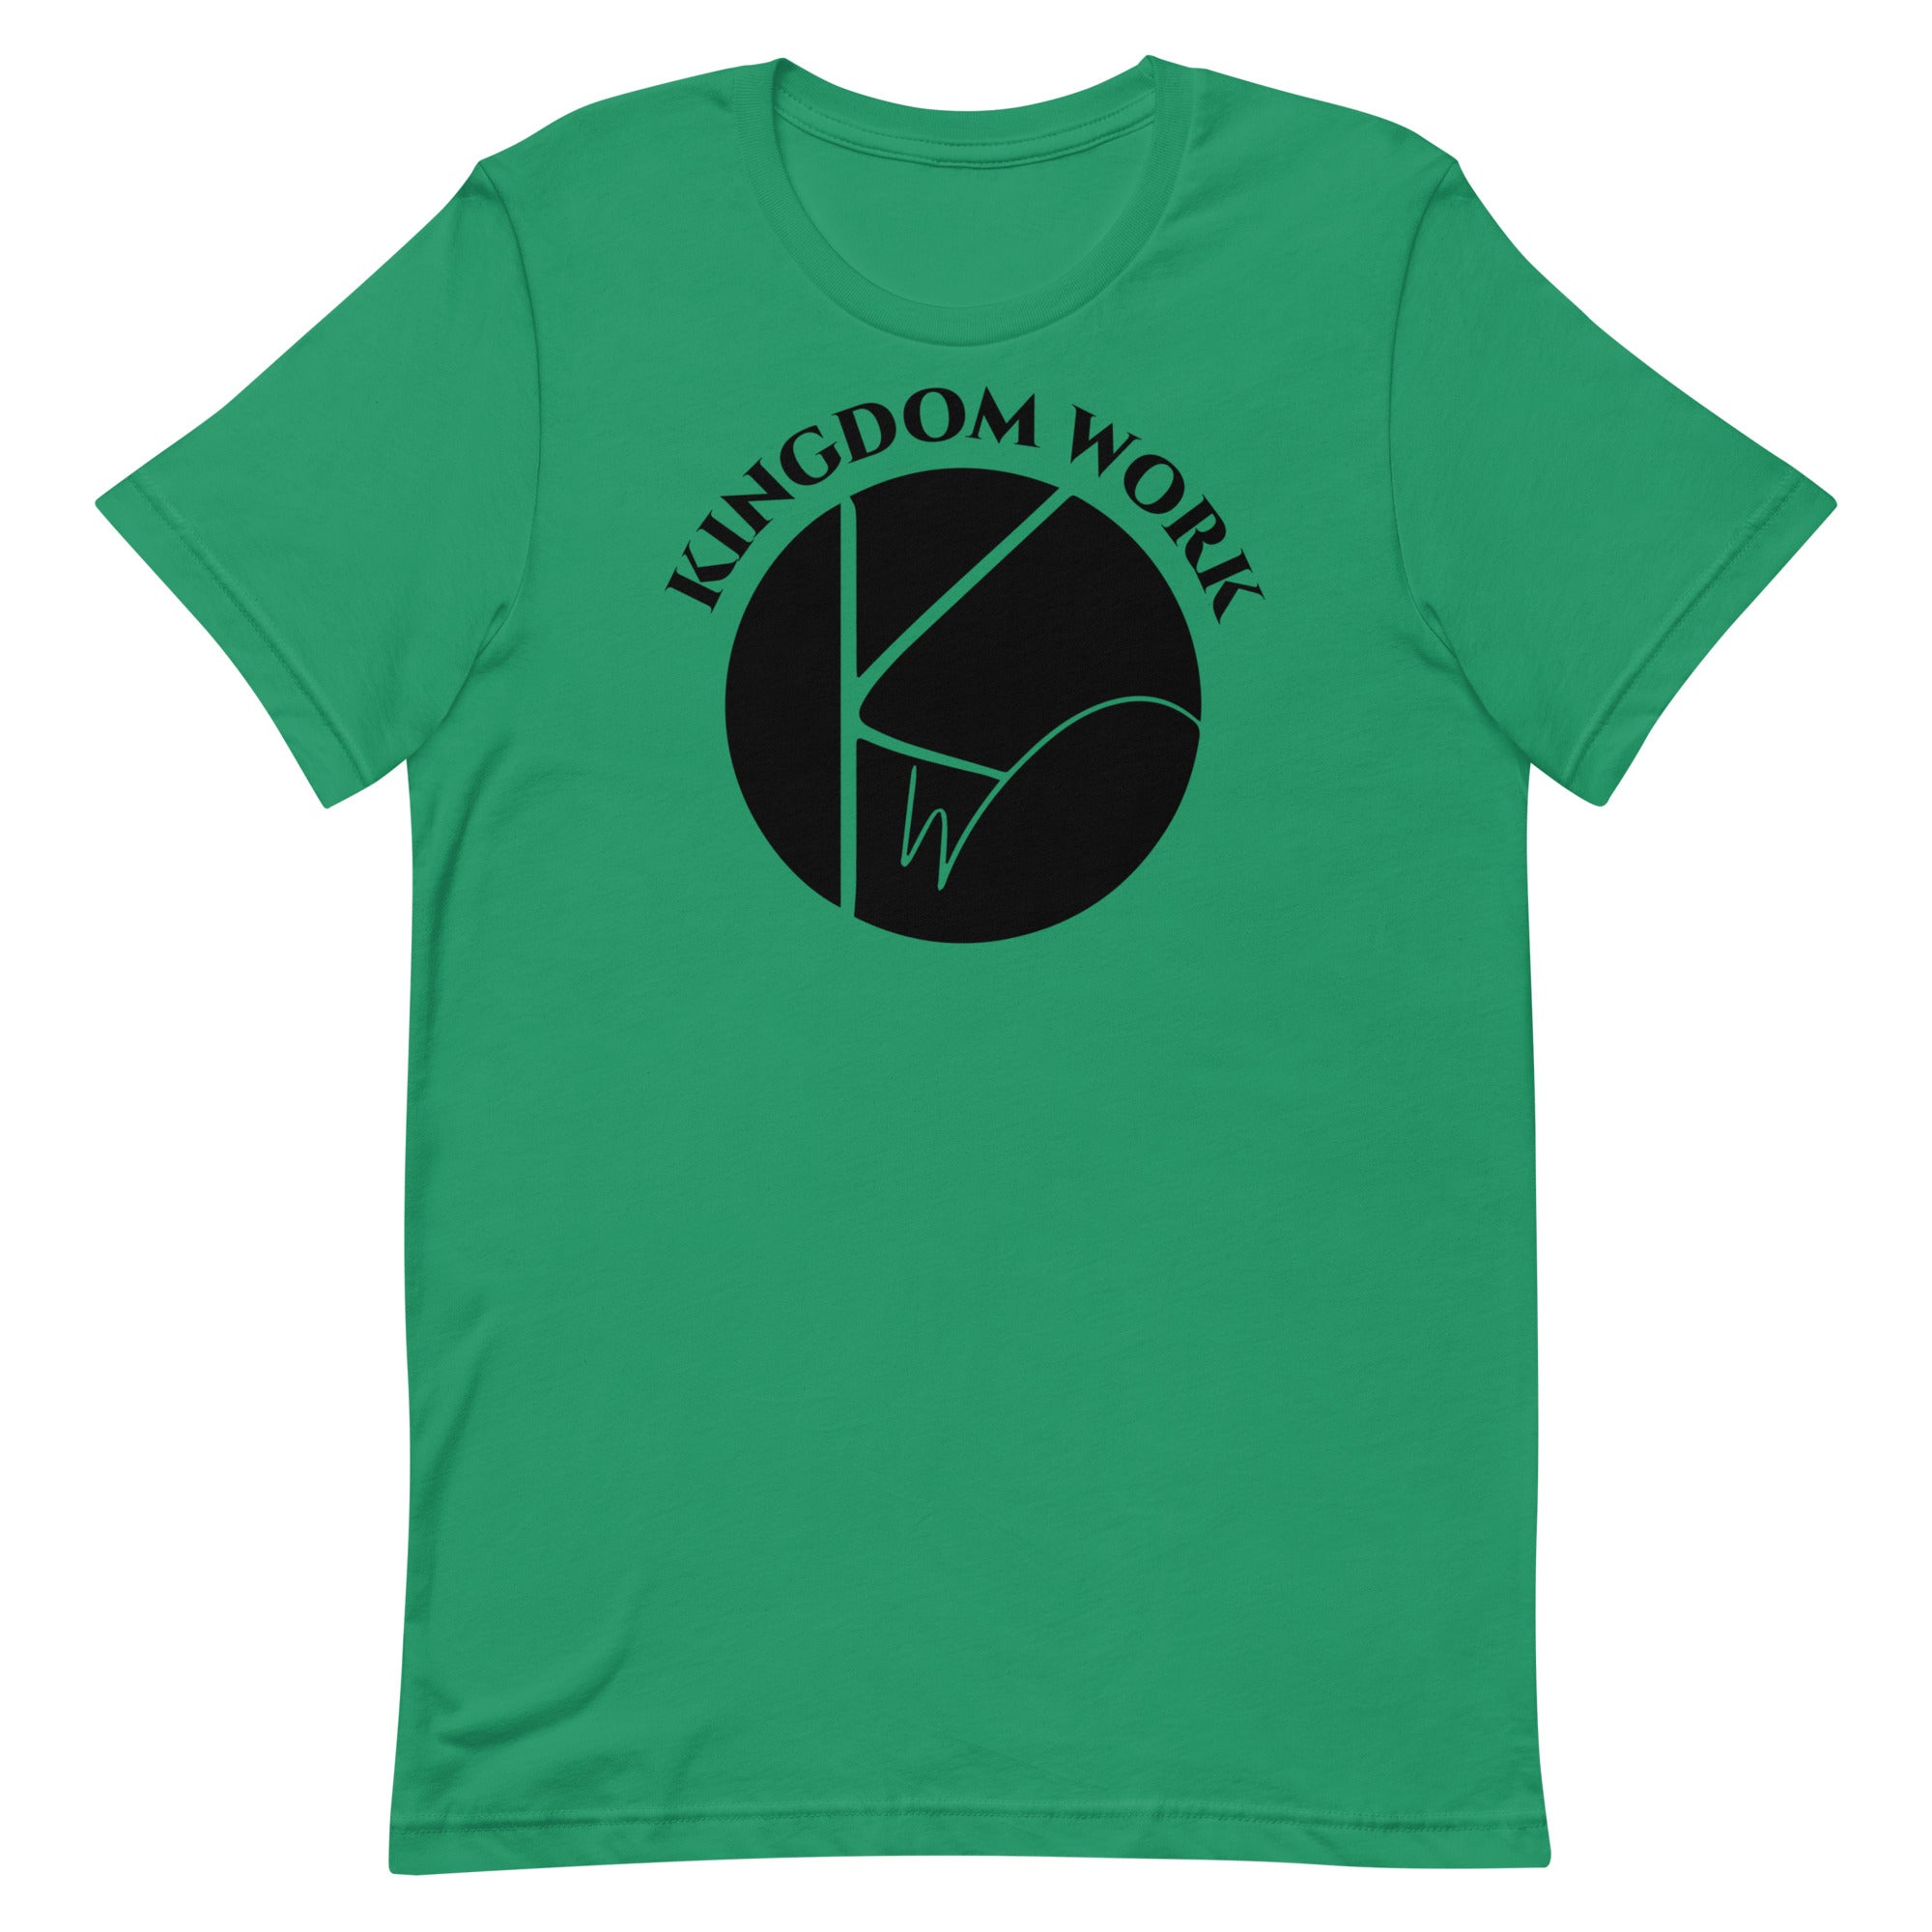 KINGDOM WORK 02 MENS FRONT AND BACK T-SHIRT